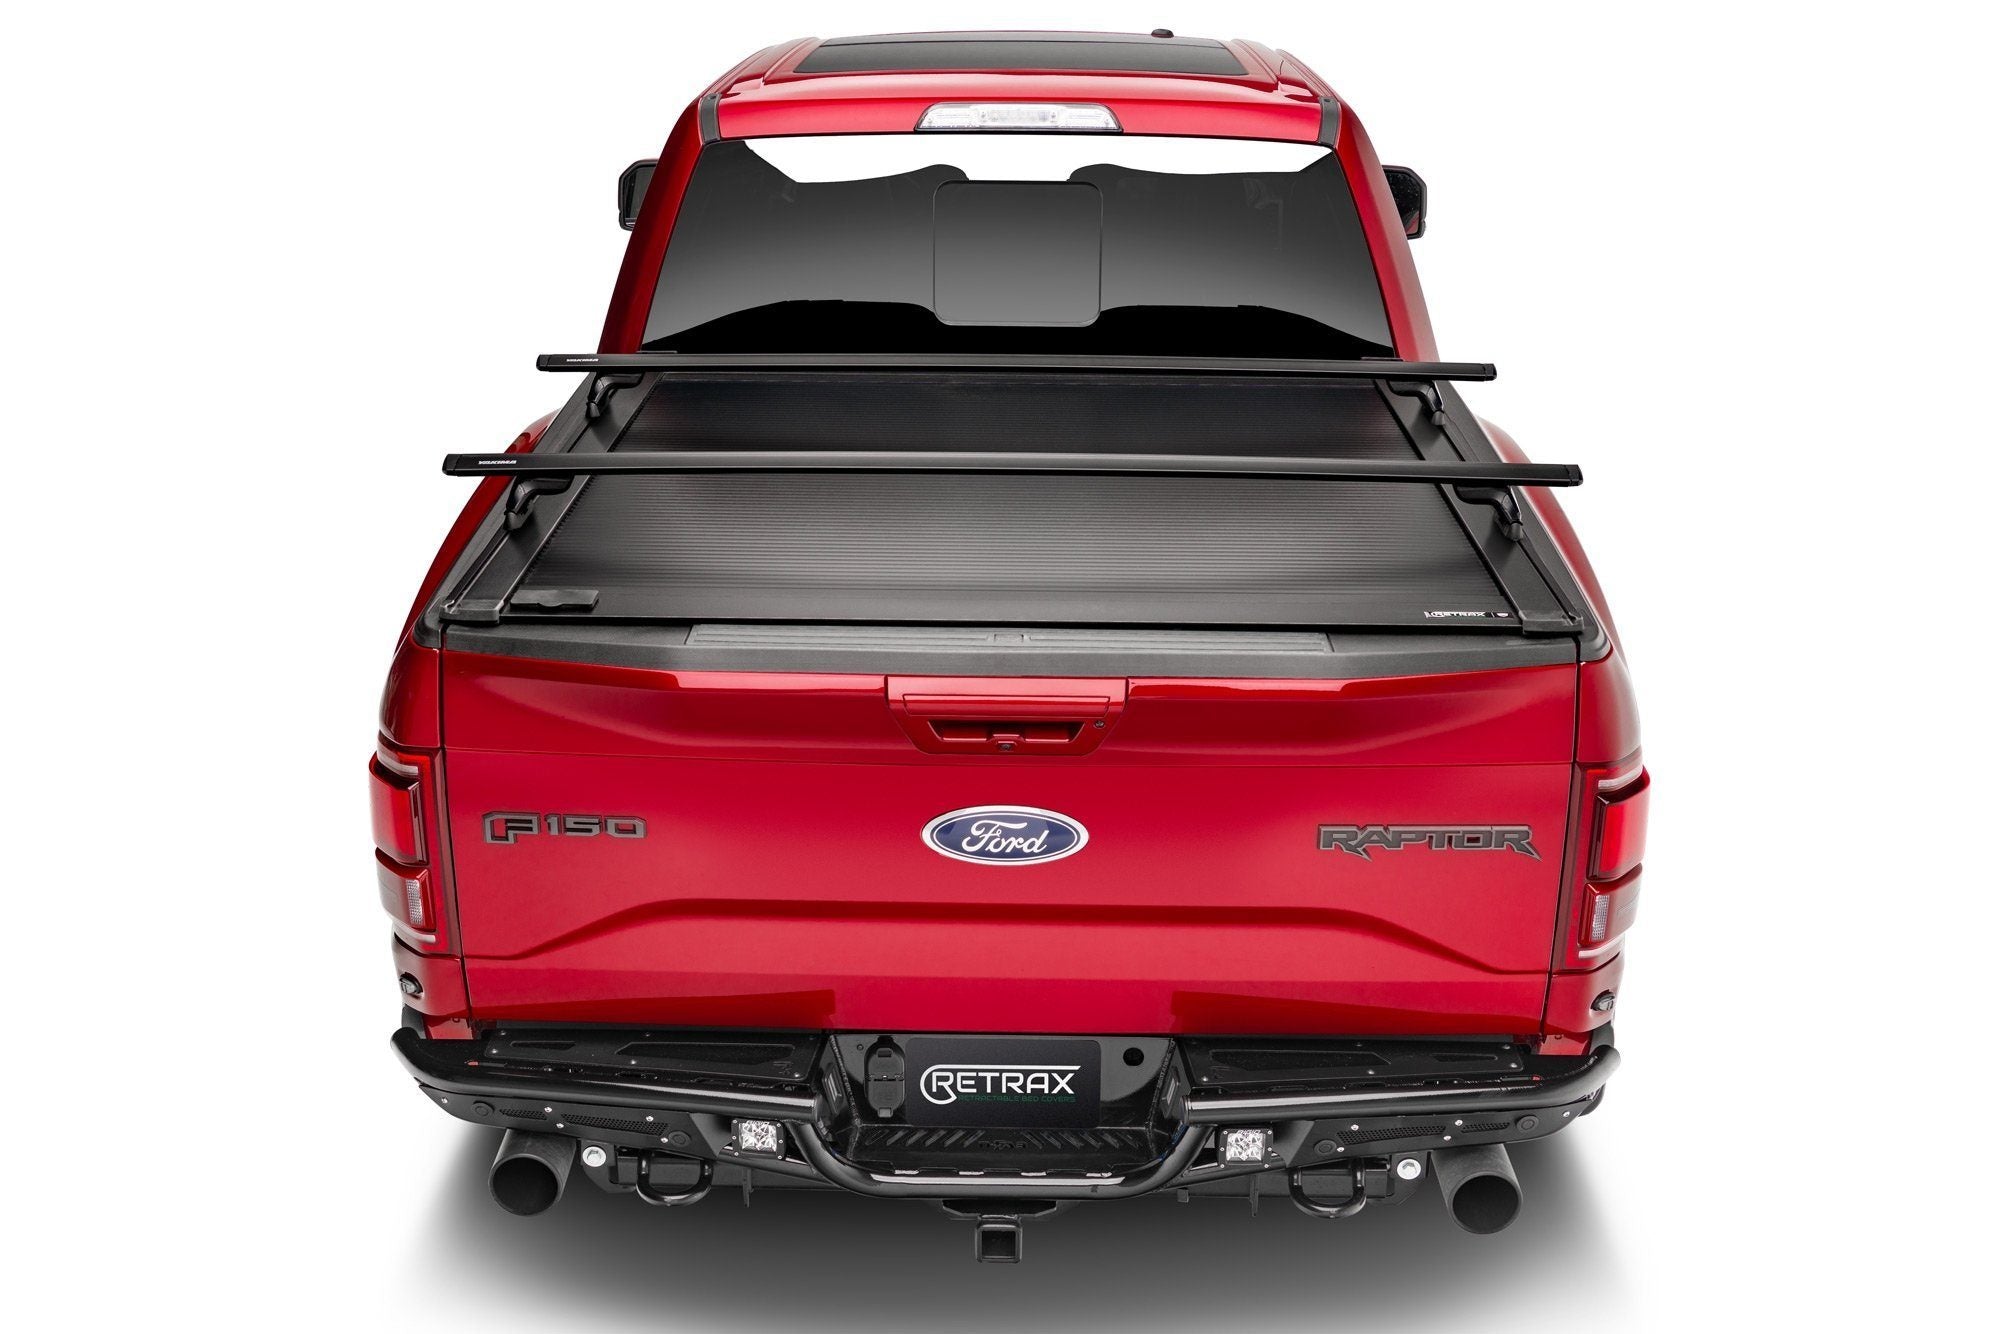 17-23 Ford Raptor PowerTrax XR Series Bed Cover Bed Cover Retrax (back view)